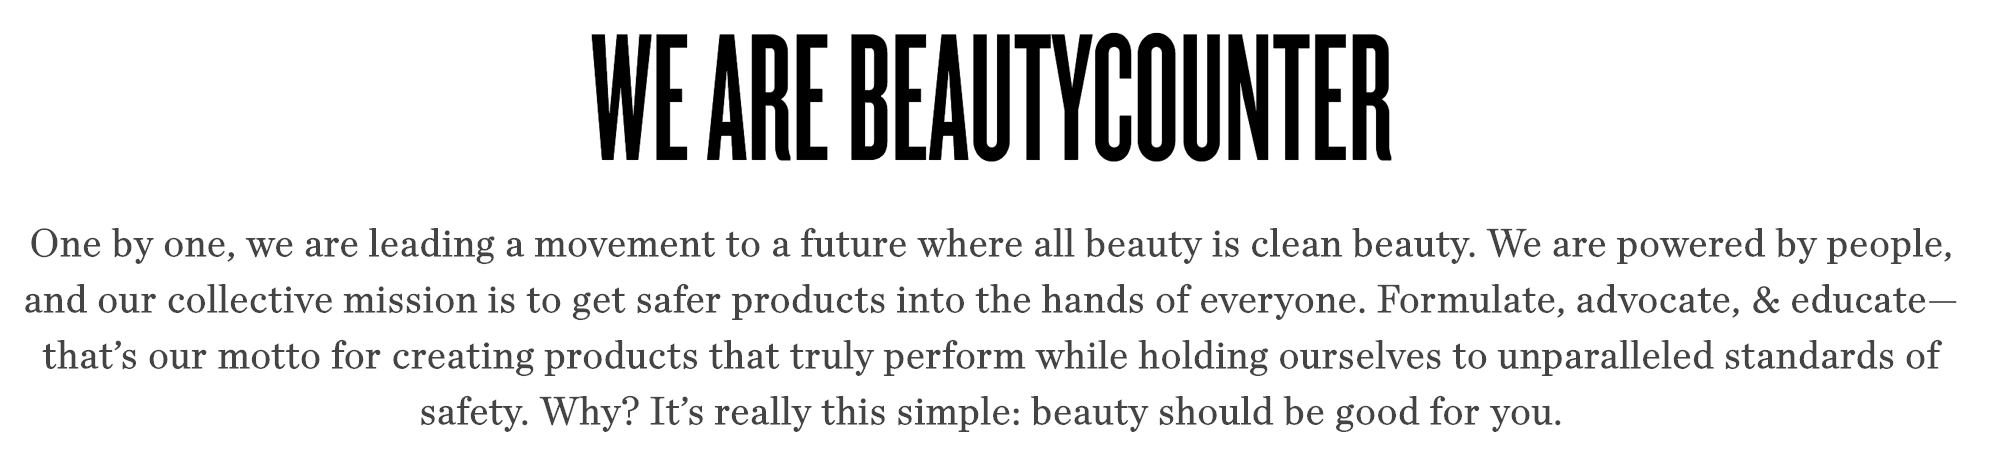 example of brand positioning we are beautycounter